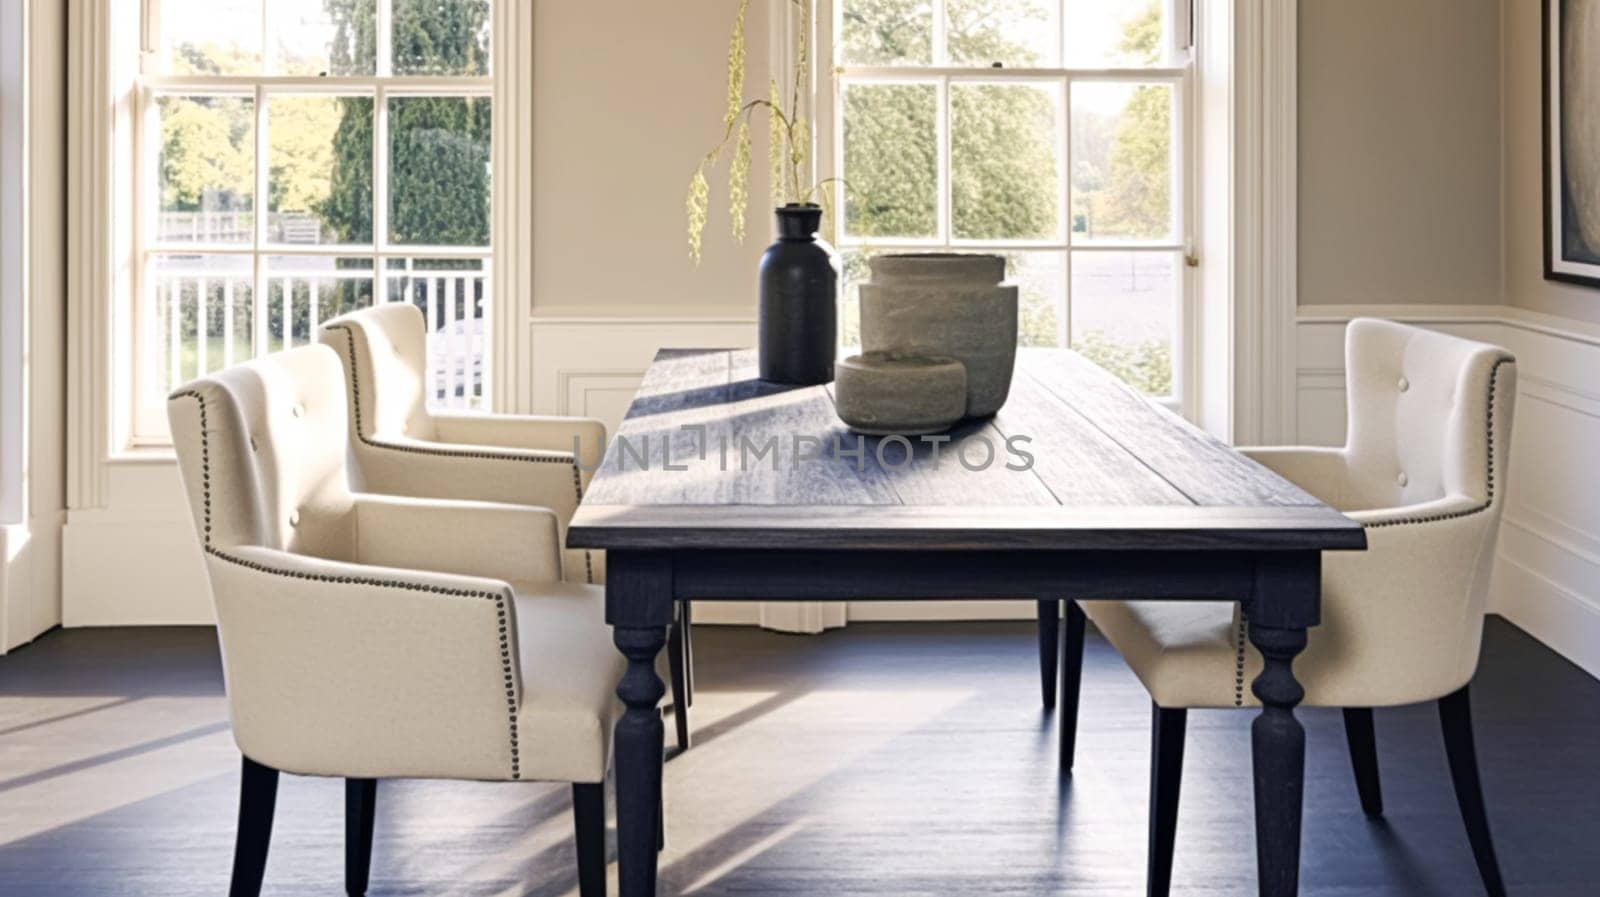 Modern cottage dining room decor, interior design and country house furniture, home decor, black table and white chairs, English countryside style interiors